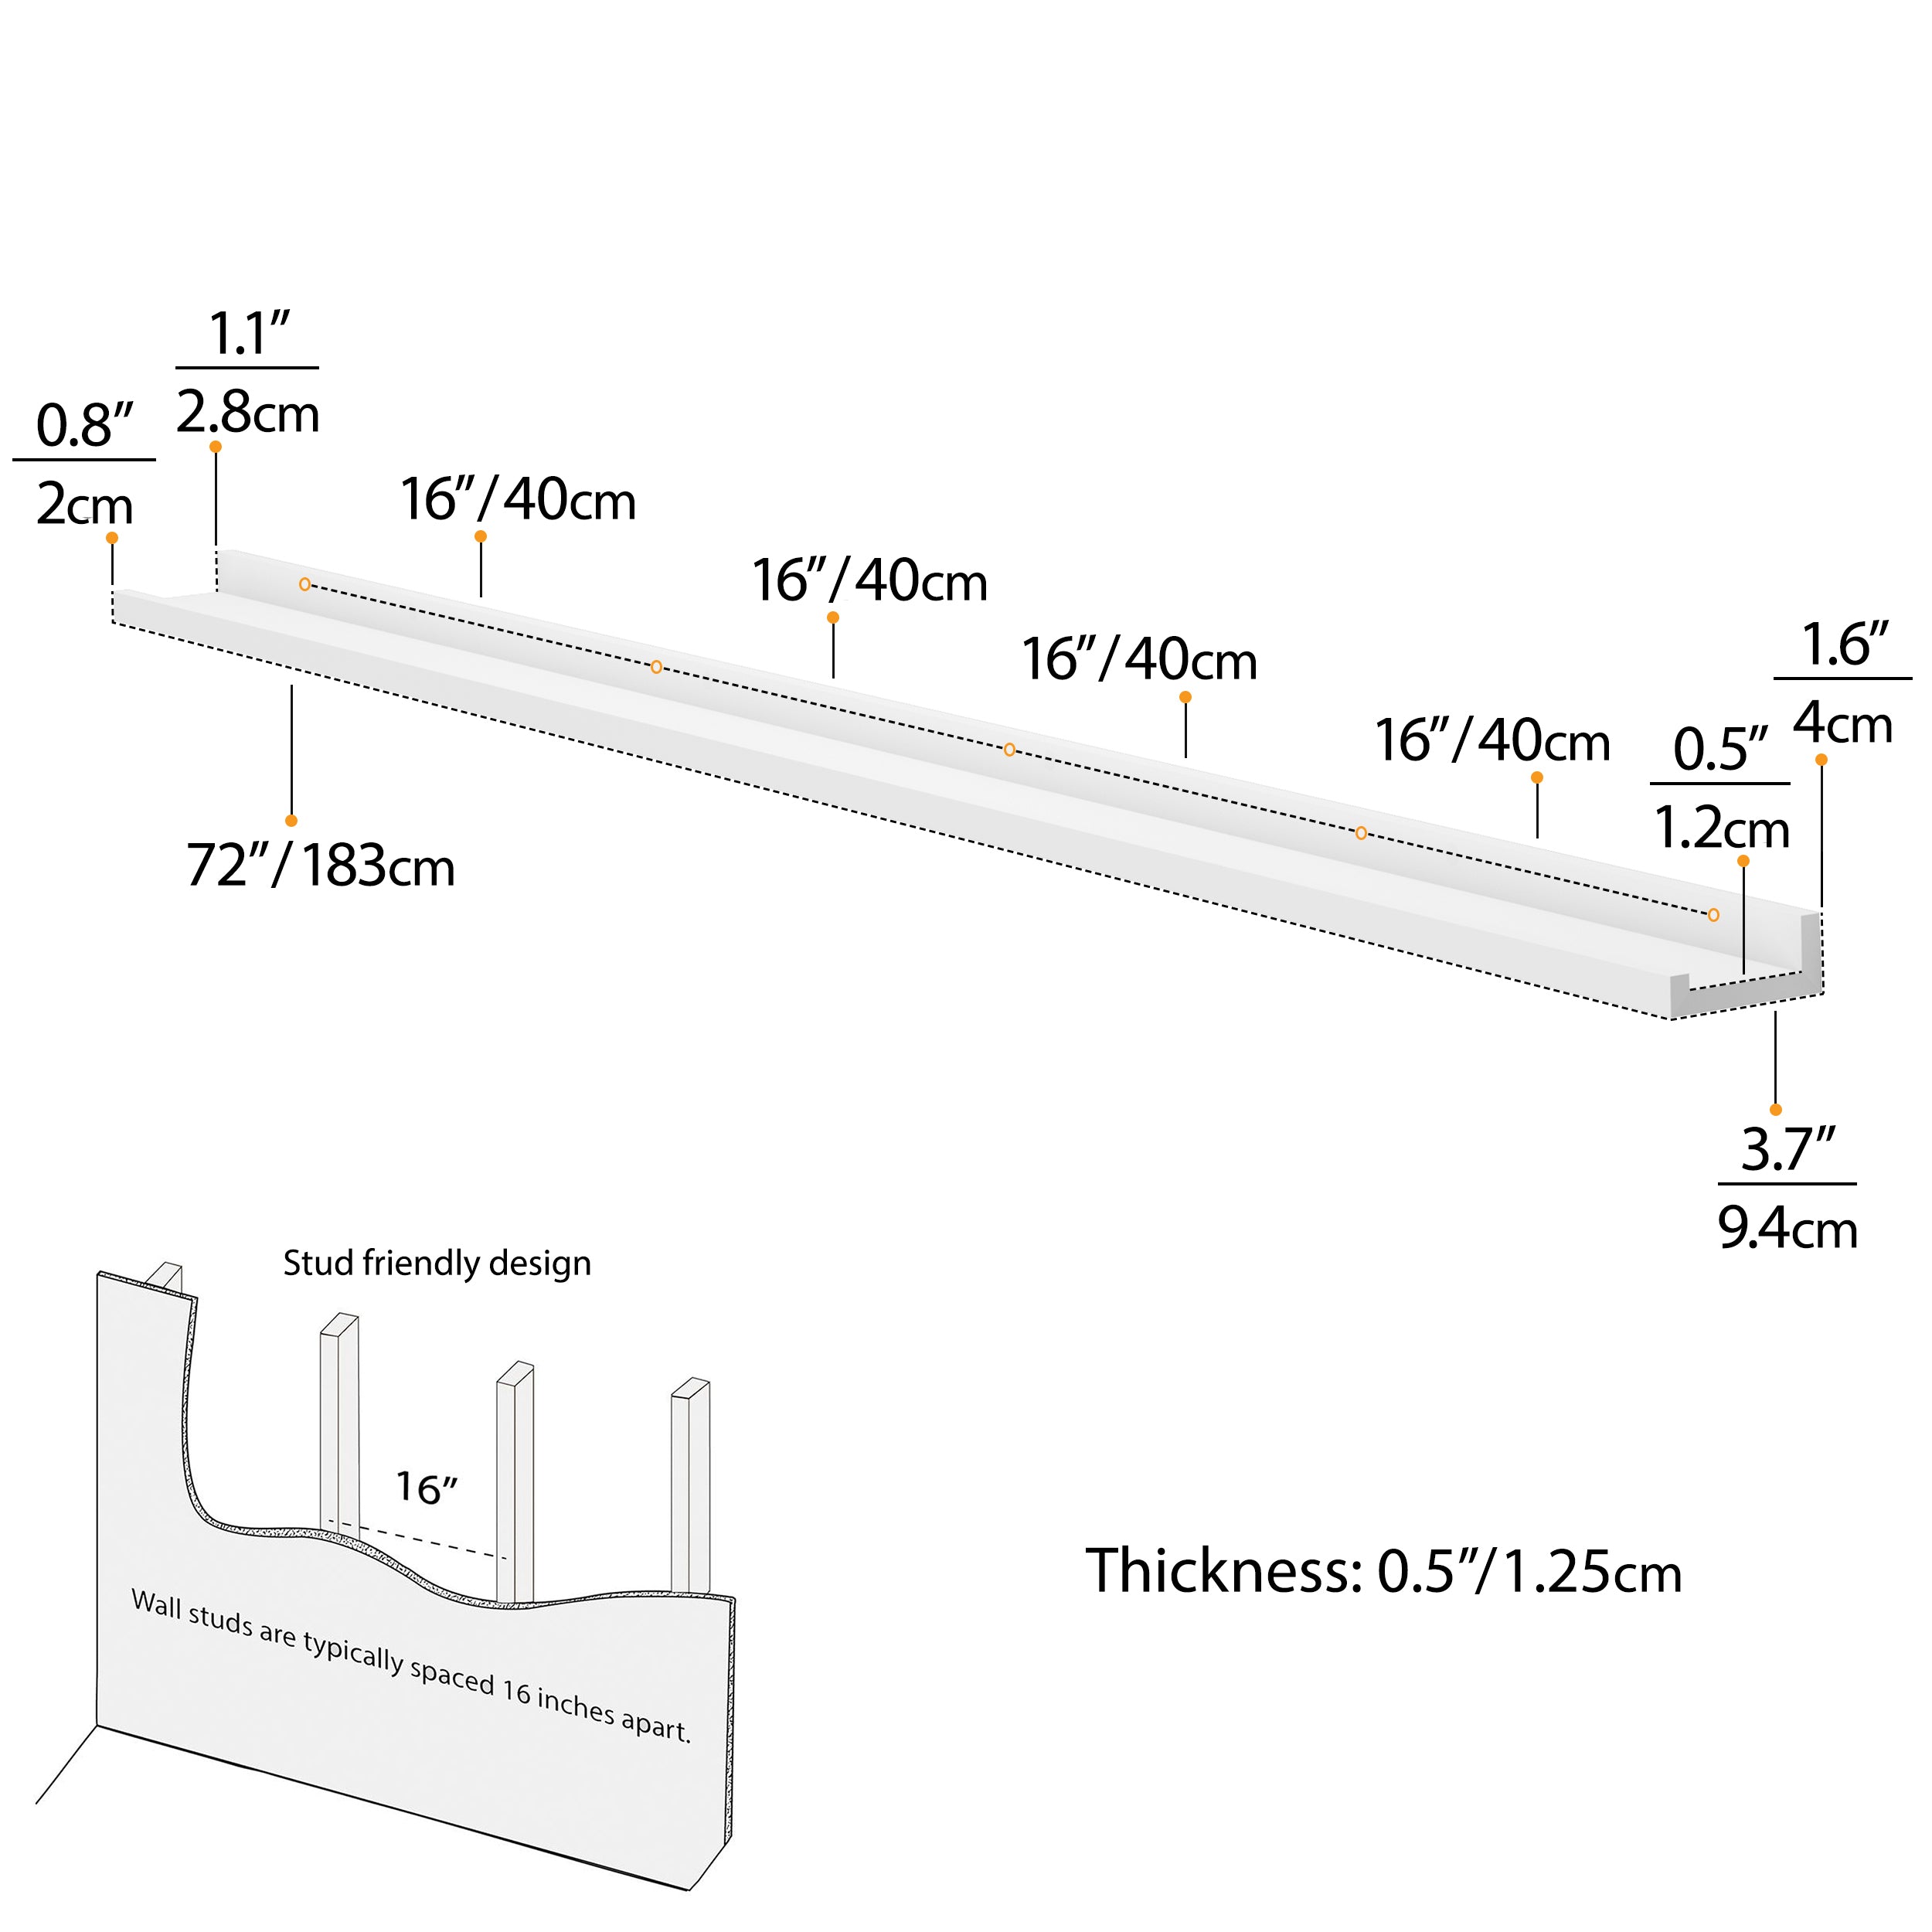 Dimensions of a 72'' white floating shelf with mounting details.